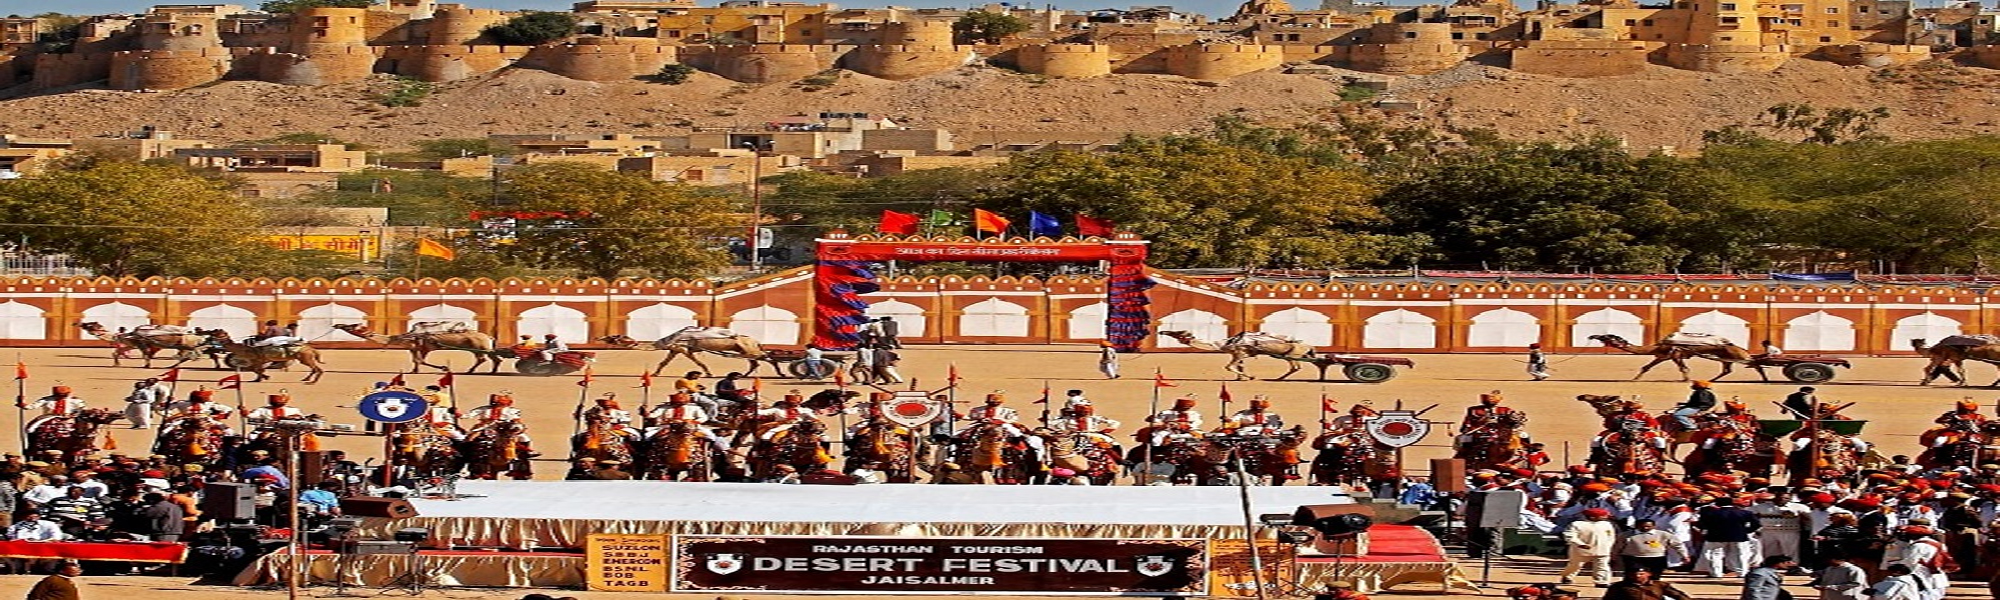 Desert Festival Tour in India with Fort and Palaces Tour in India  